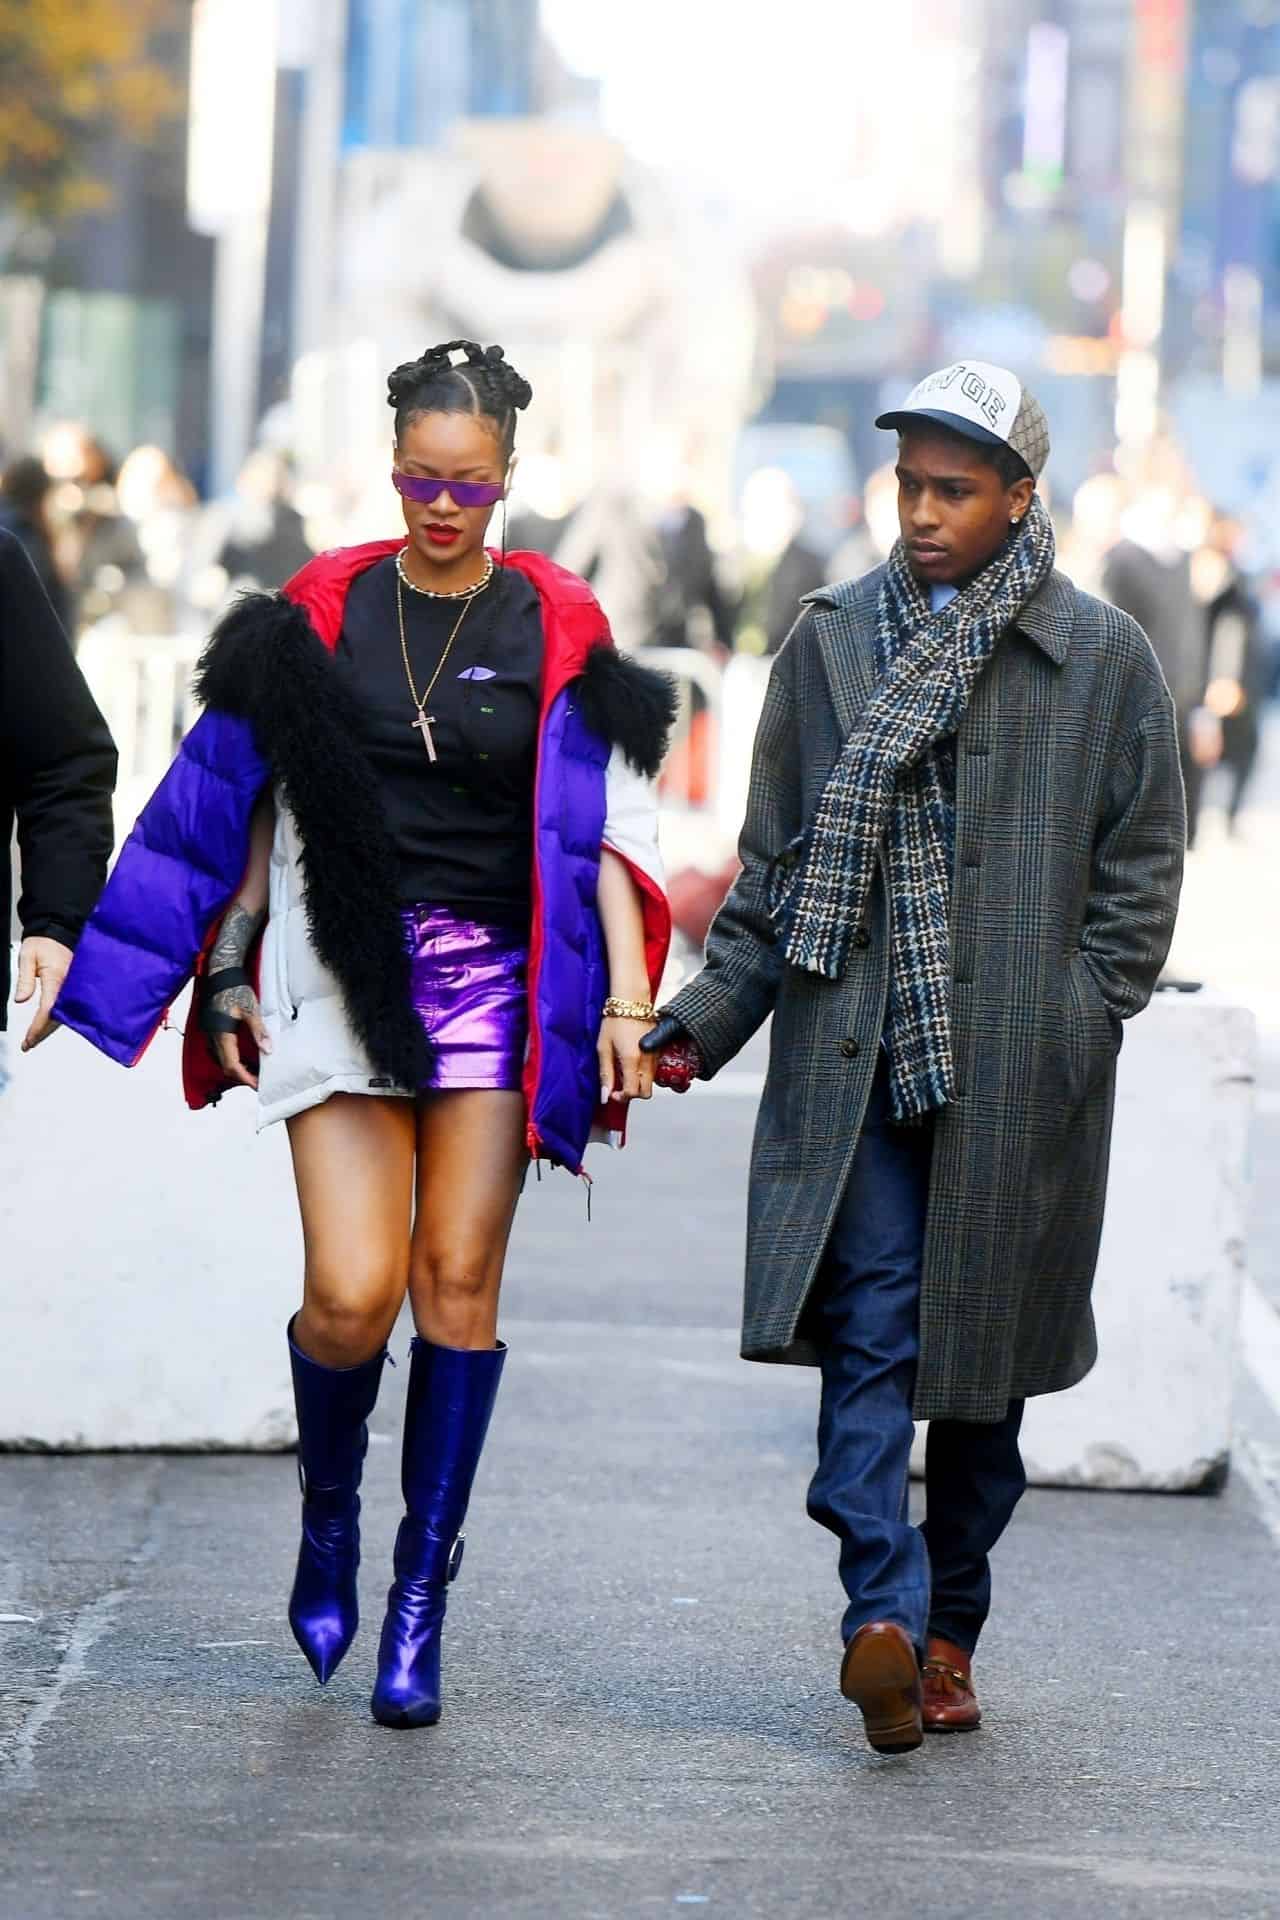 Rihanna and A$AP Rocky Attend a Basquiat Exhibit in New York